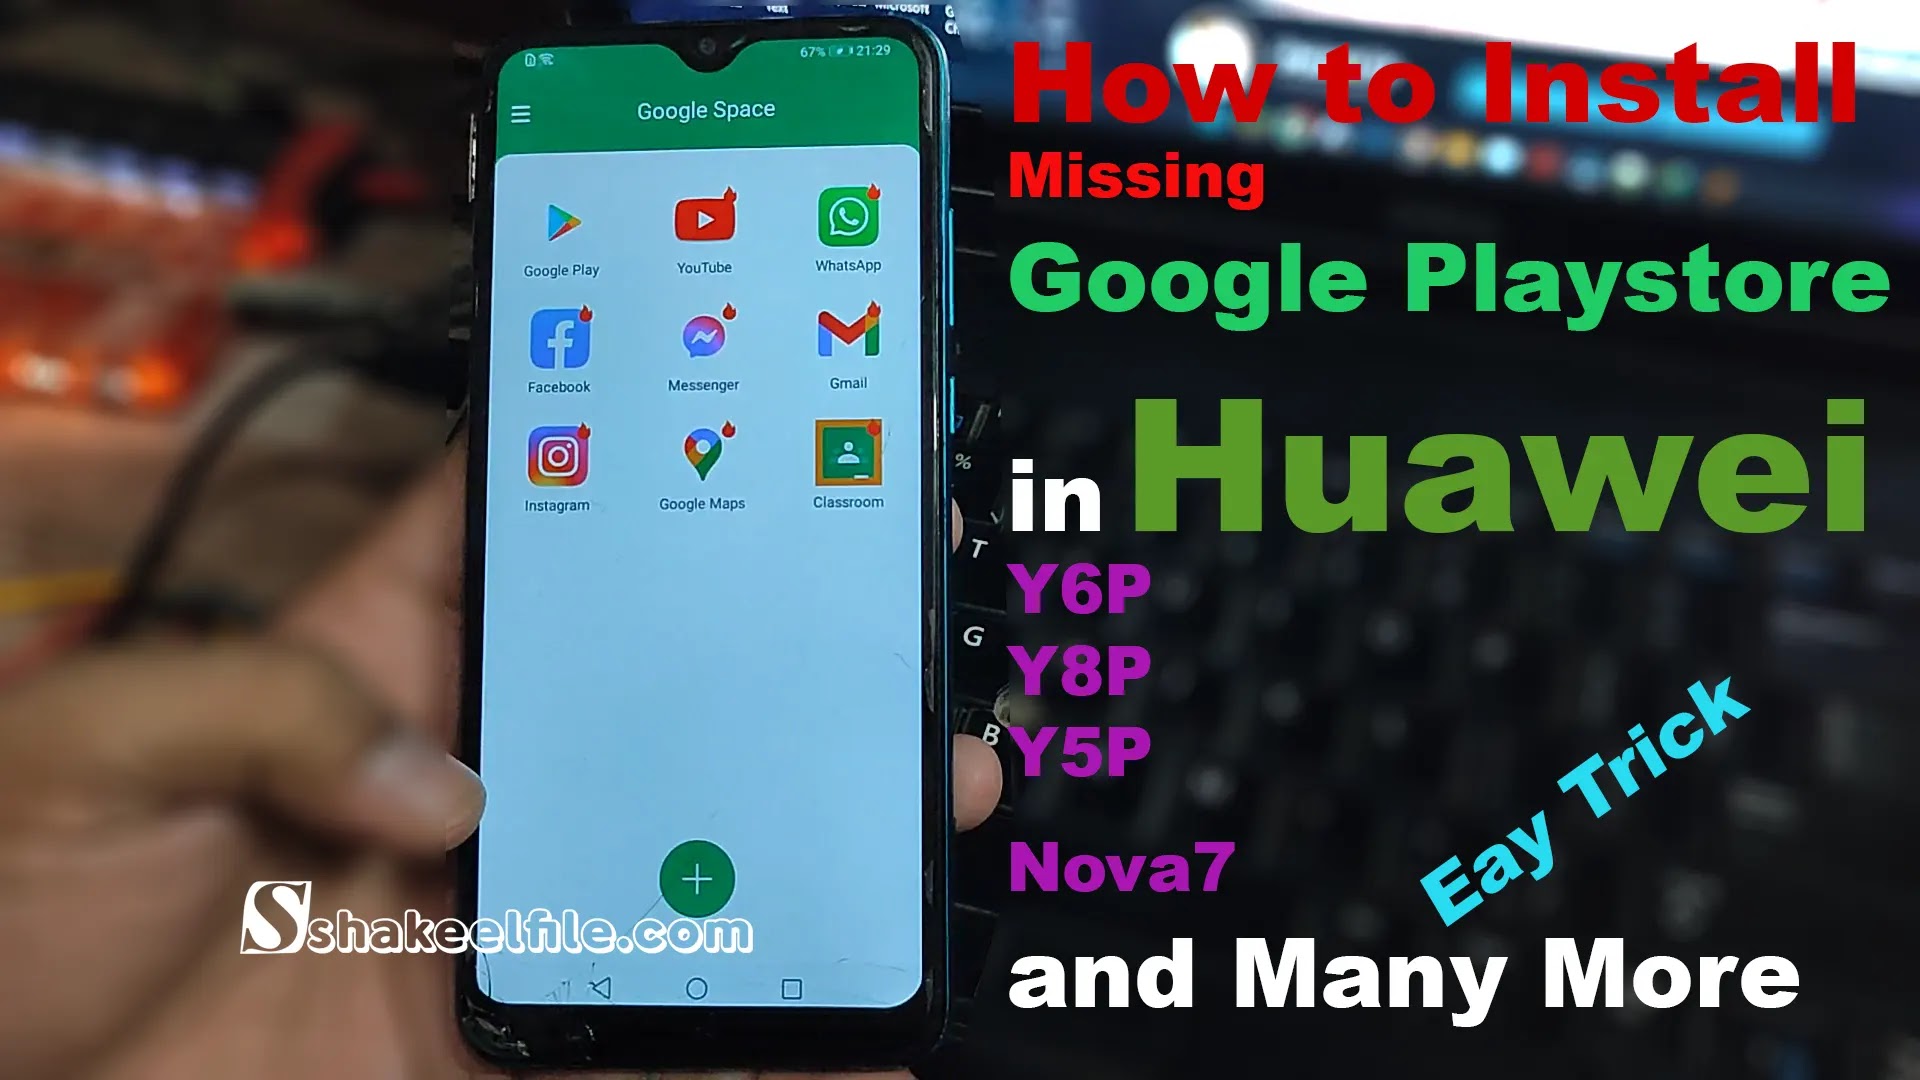 Huawei-Install-Missing-Google-Playstore